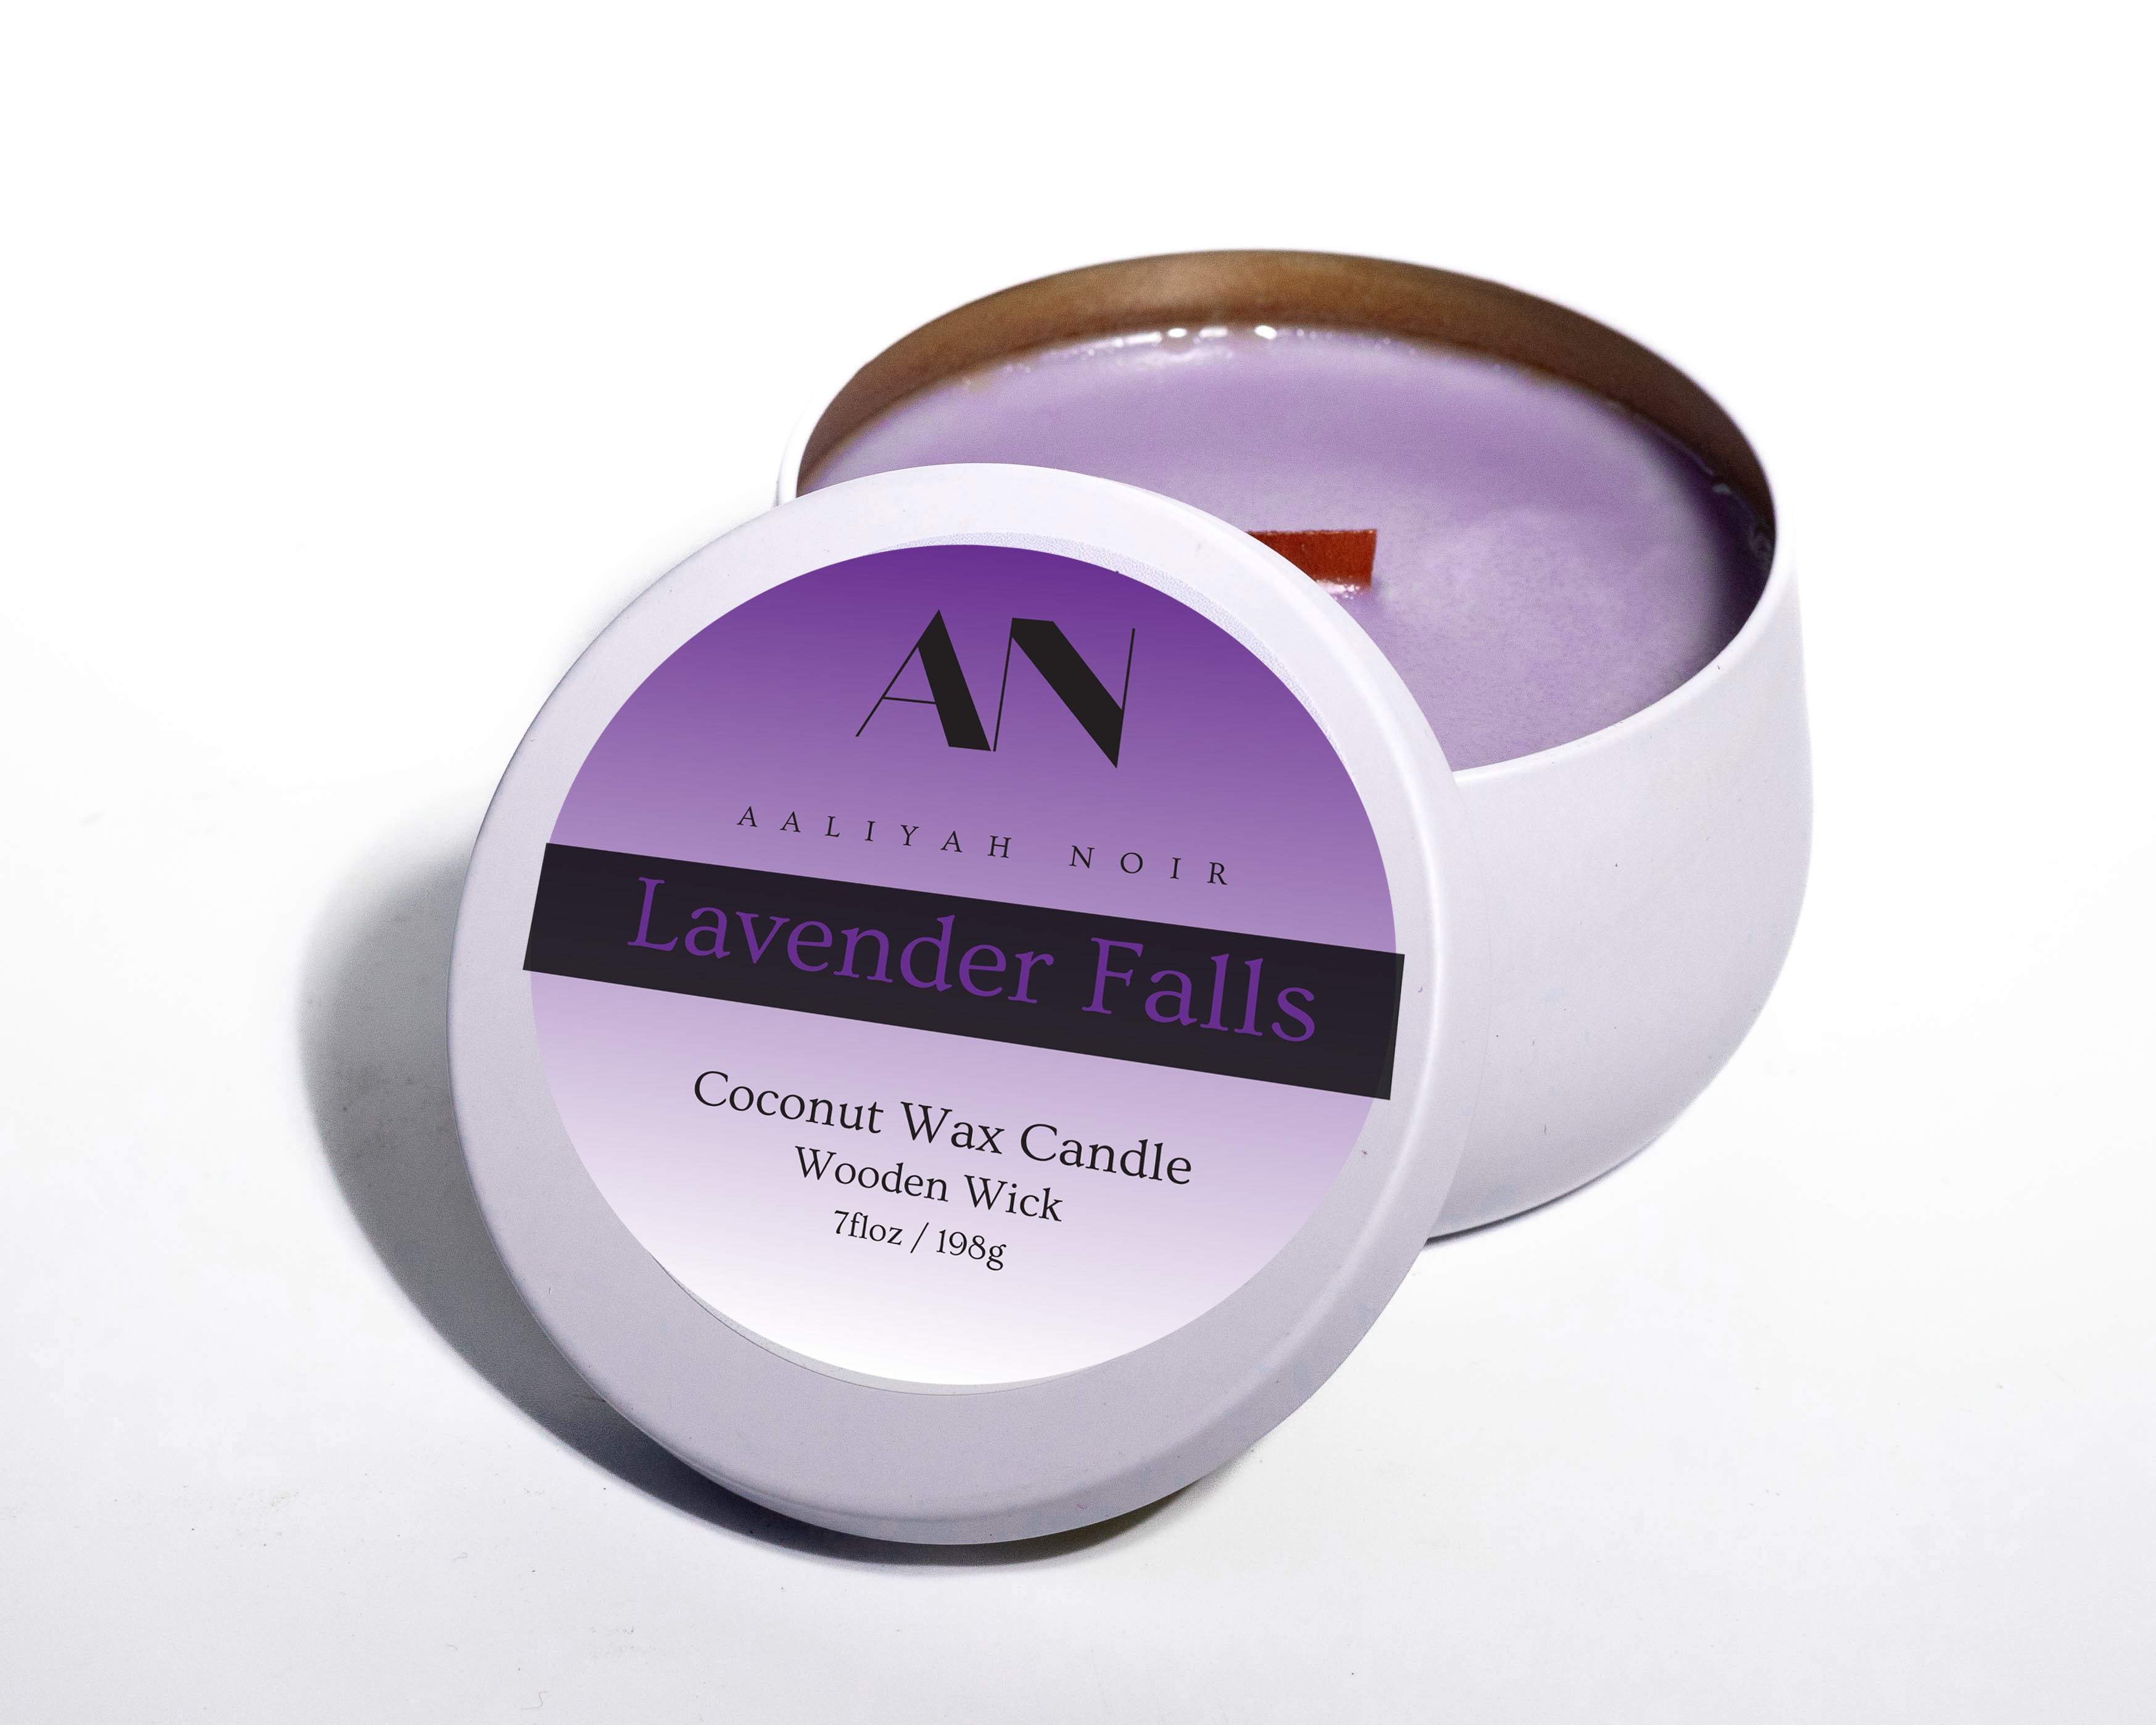 Lavender Falls Exclusive Coconut Wax Candle